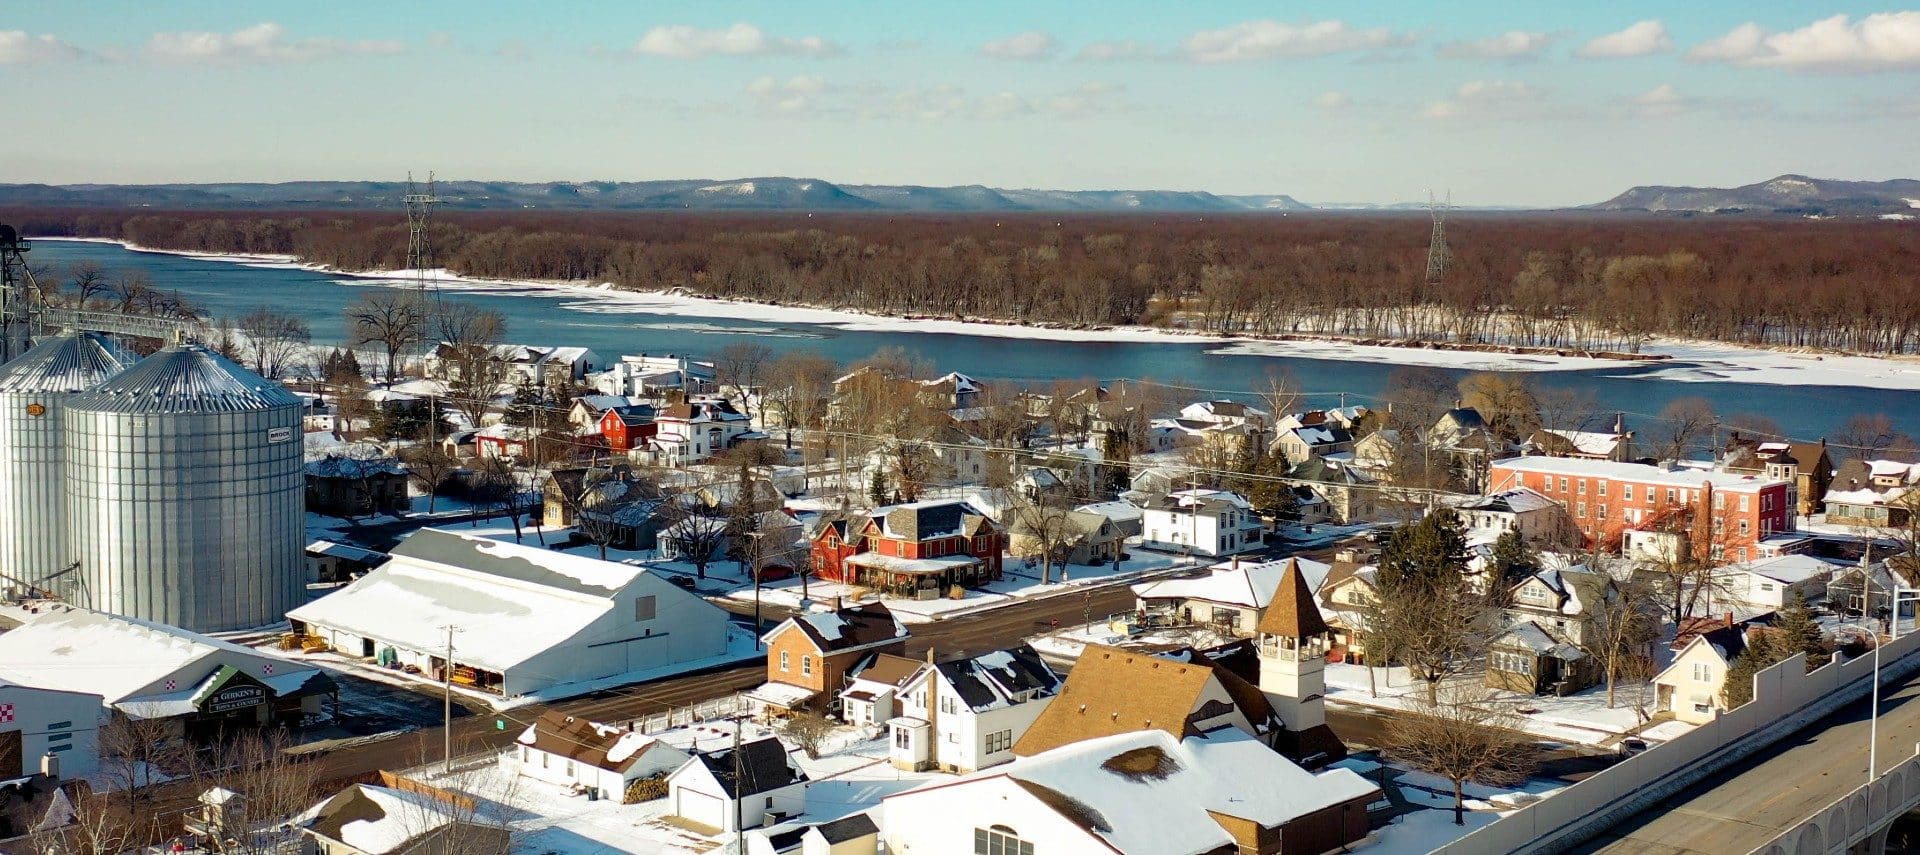 Overhead drone image above a small town dusted in snow near a large river